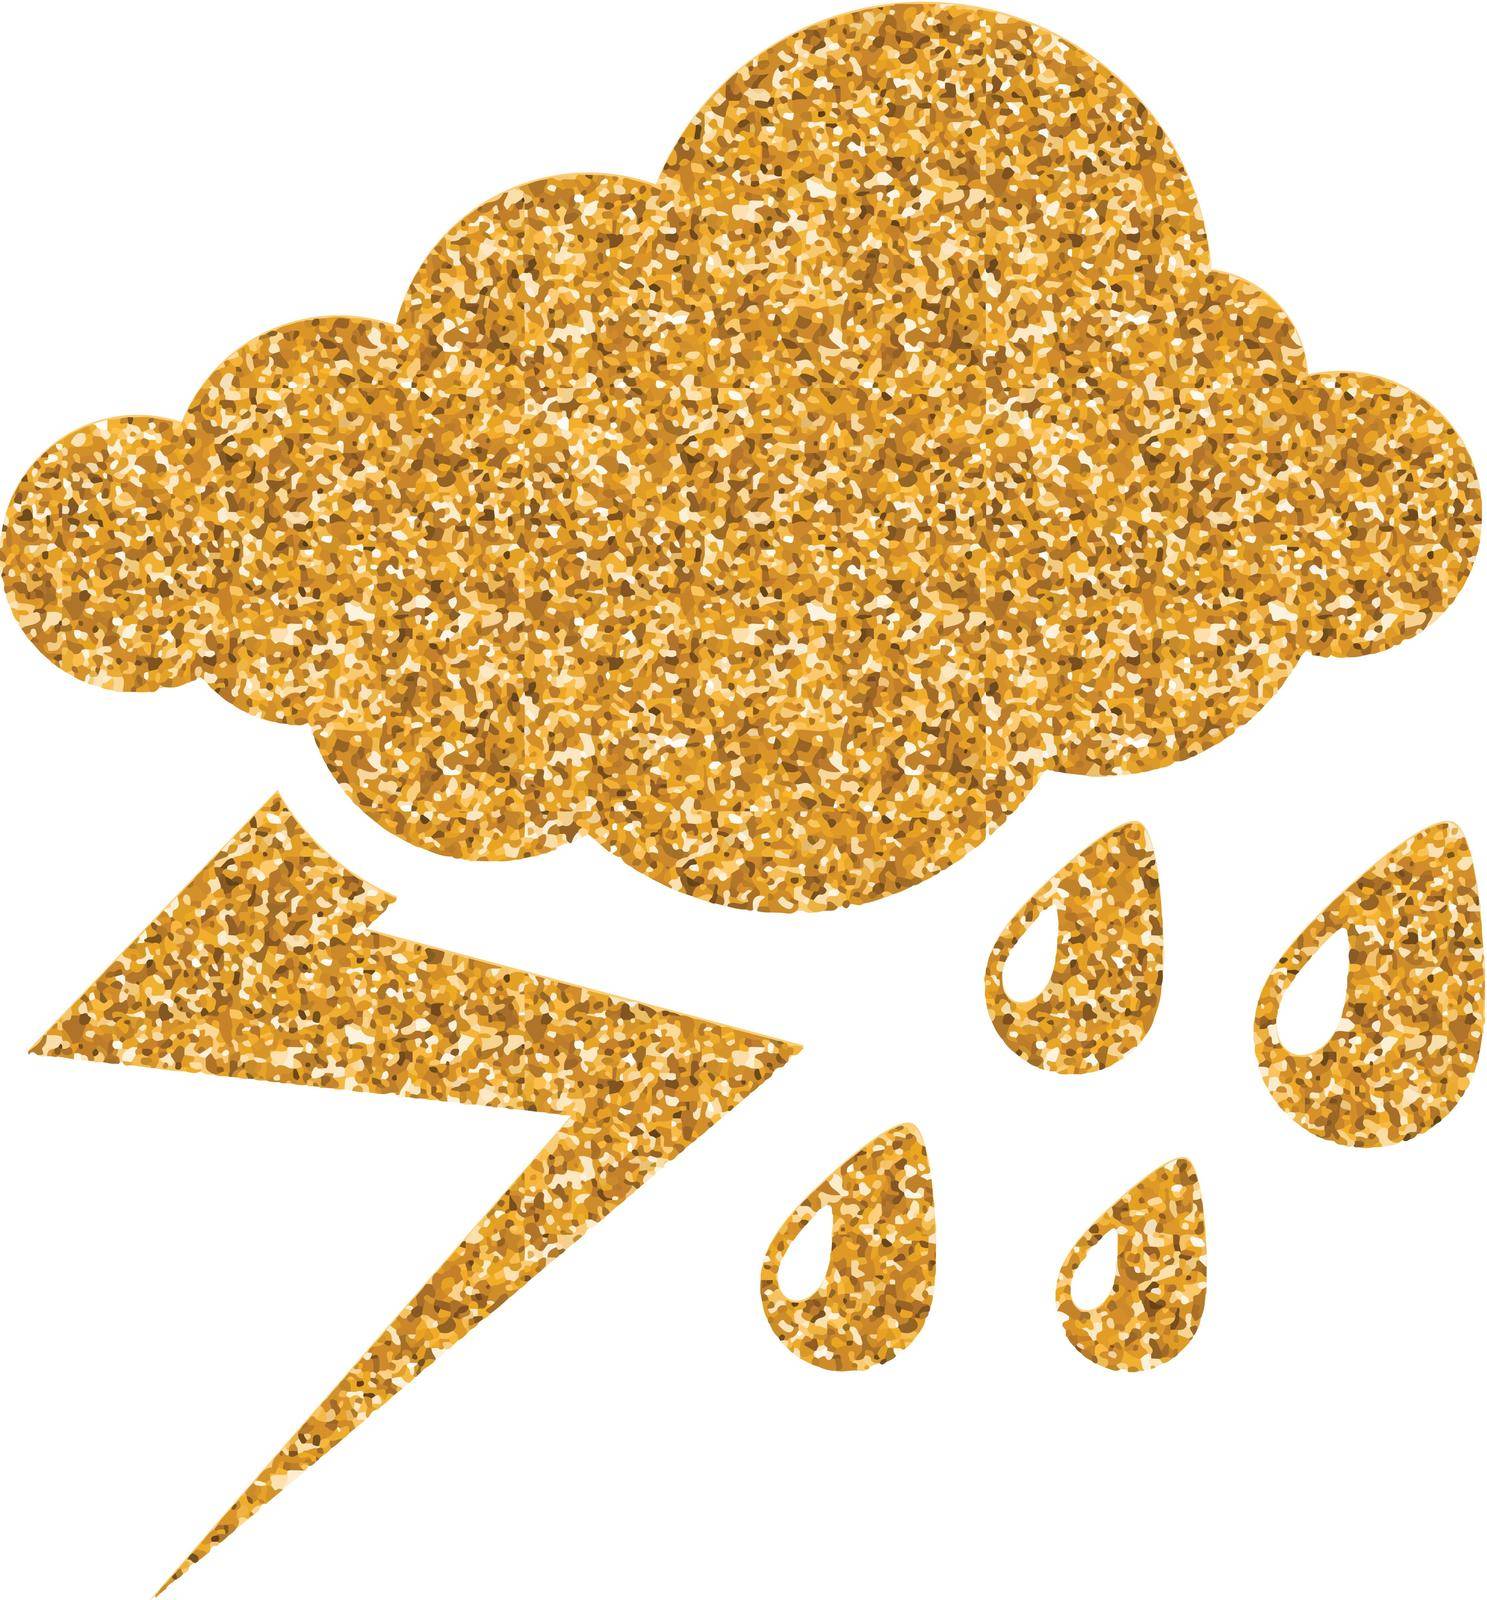 Weather overcast storm icon in gold glitter texture. Sparkle luxury style vector illustration.